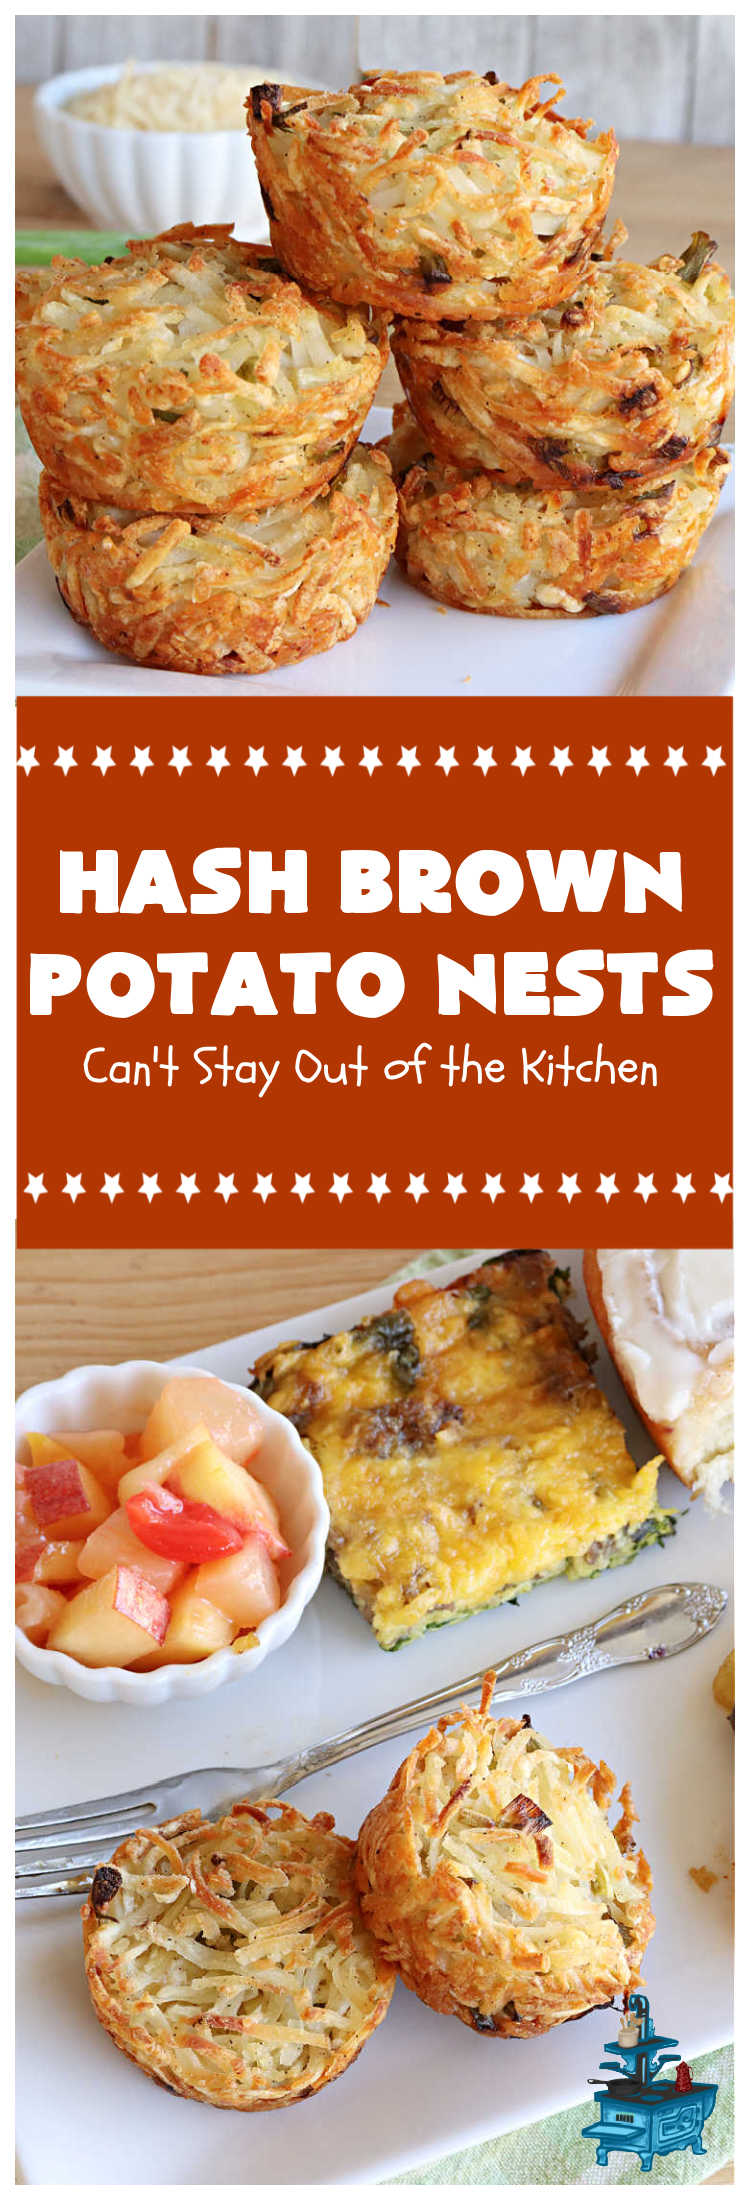 Hash Brown Potato Nests | Can't Stay Out of the Kitchen | these adorable #potato nests are marvelous for weekend, company or a #holiday #breakfast. They're simple to make & are baked in muffin tins. Excellent side for a #HolidayBreakfast. #GlutenFree #ParmesanCheese #HashBrowns #HashBrownPotatoNests